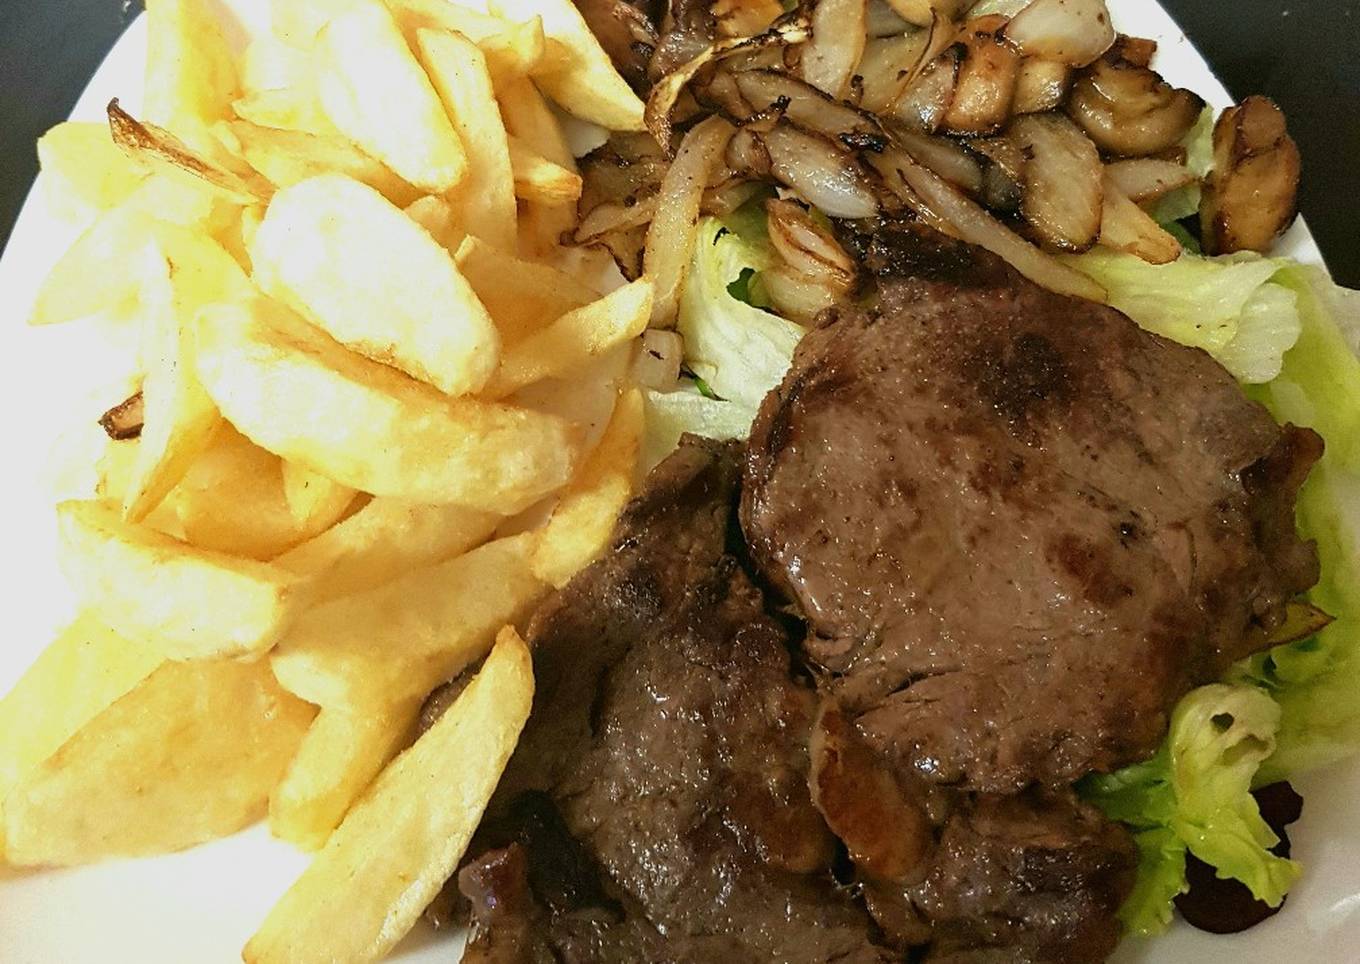 Ribeye Steak onions and mushrooms. With homemade Chips 😀